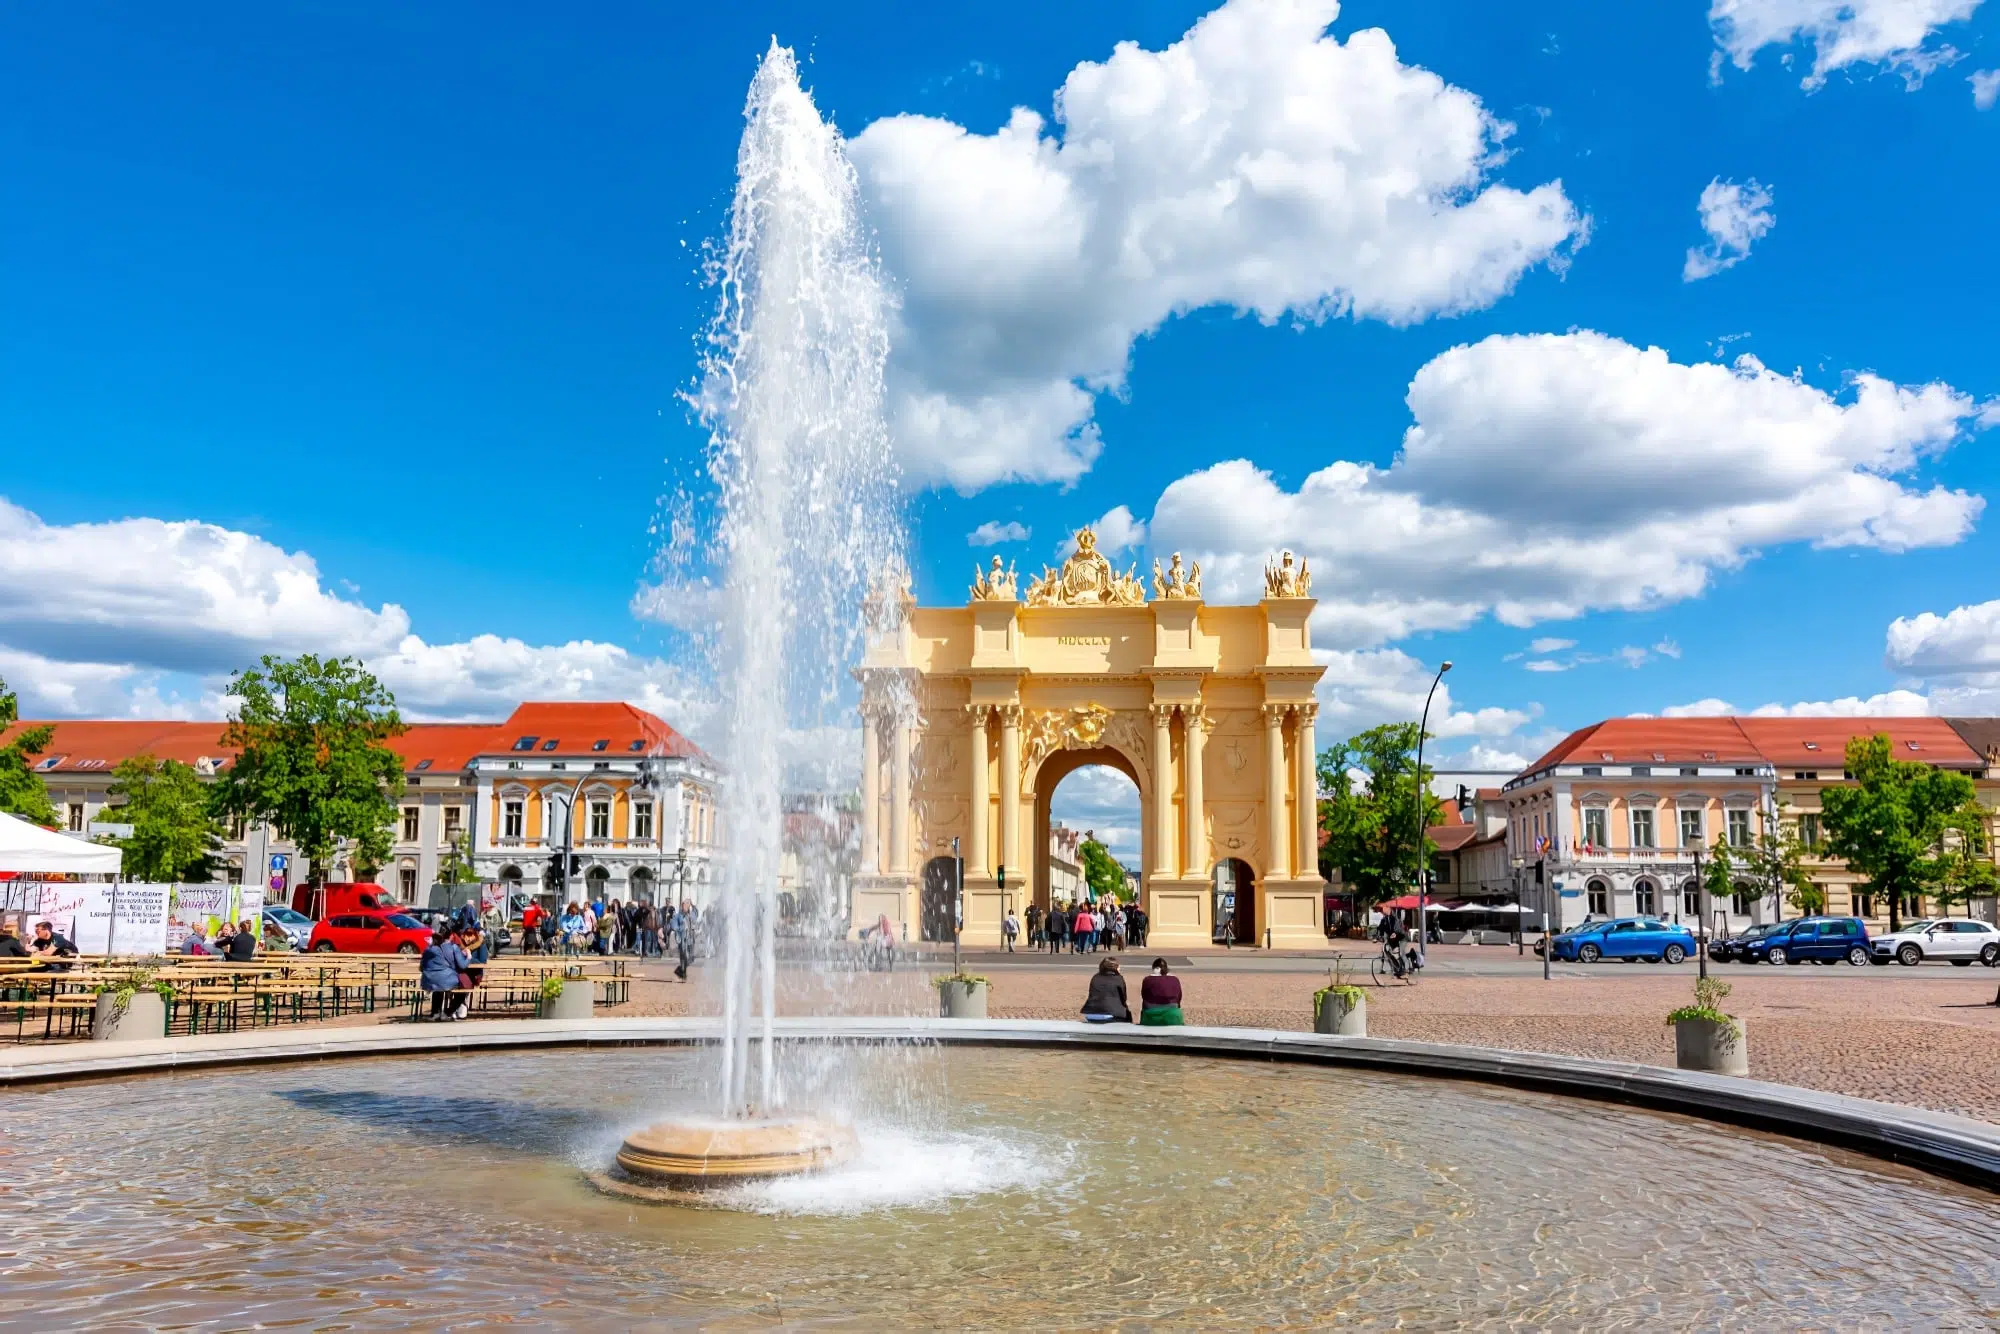 15 must-do things to do in Potsdam